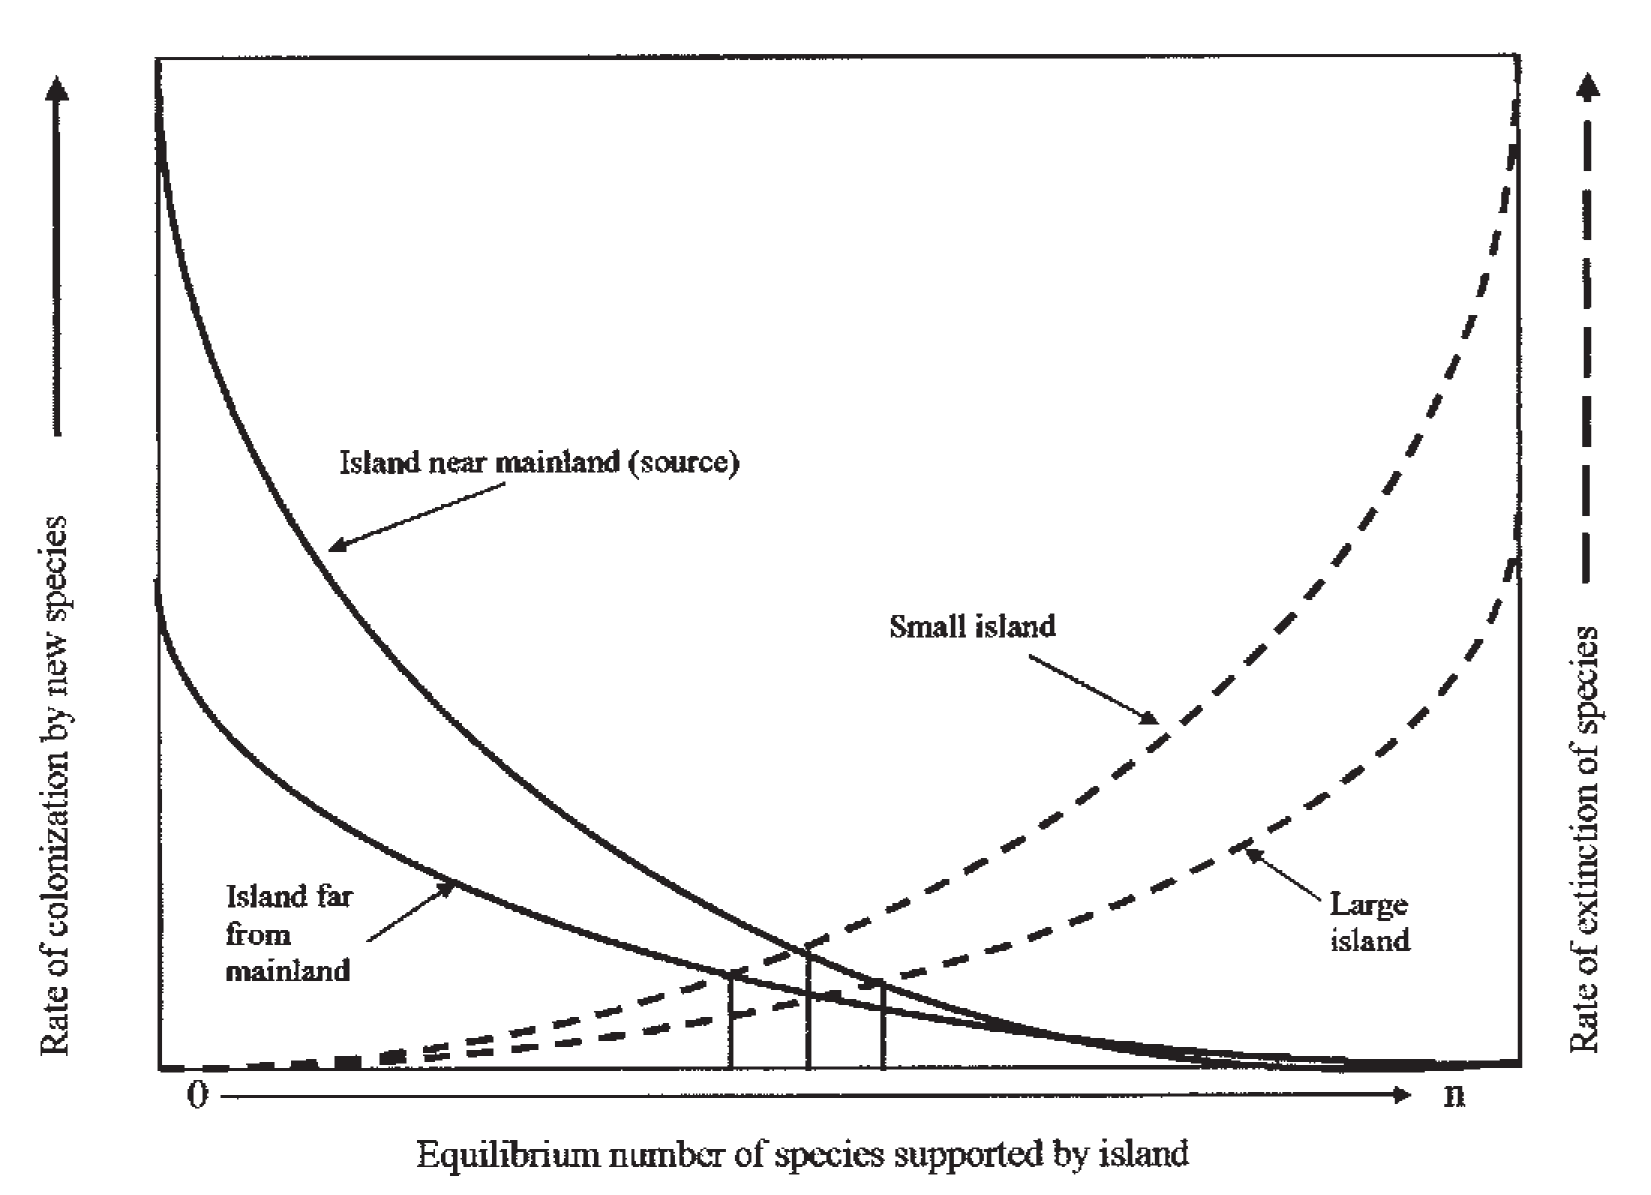 A diagram illustrating how the equilibrium number of species supported by an island is determined by distance from the mainland and island size. The x-axis is "Equilibrium number of species supported by island." The left y-axis is "Rate of colonization by new species." The right y-axis is "rate of extinction of species." Two solid curved lines, the upper for an island near the mainland and the lower for an island far from the mainland, are highest to the left and decrease to zero near the right. Two dotted lines are highest toward the right and decrease to zero near the left. The points where each pair of lines cross is the equilibrium number of species that an island will support.